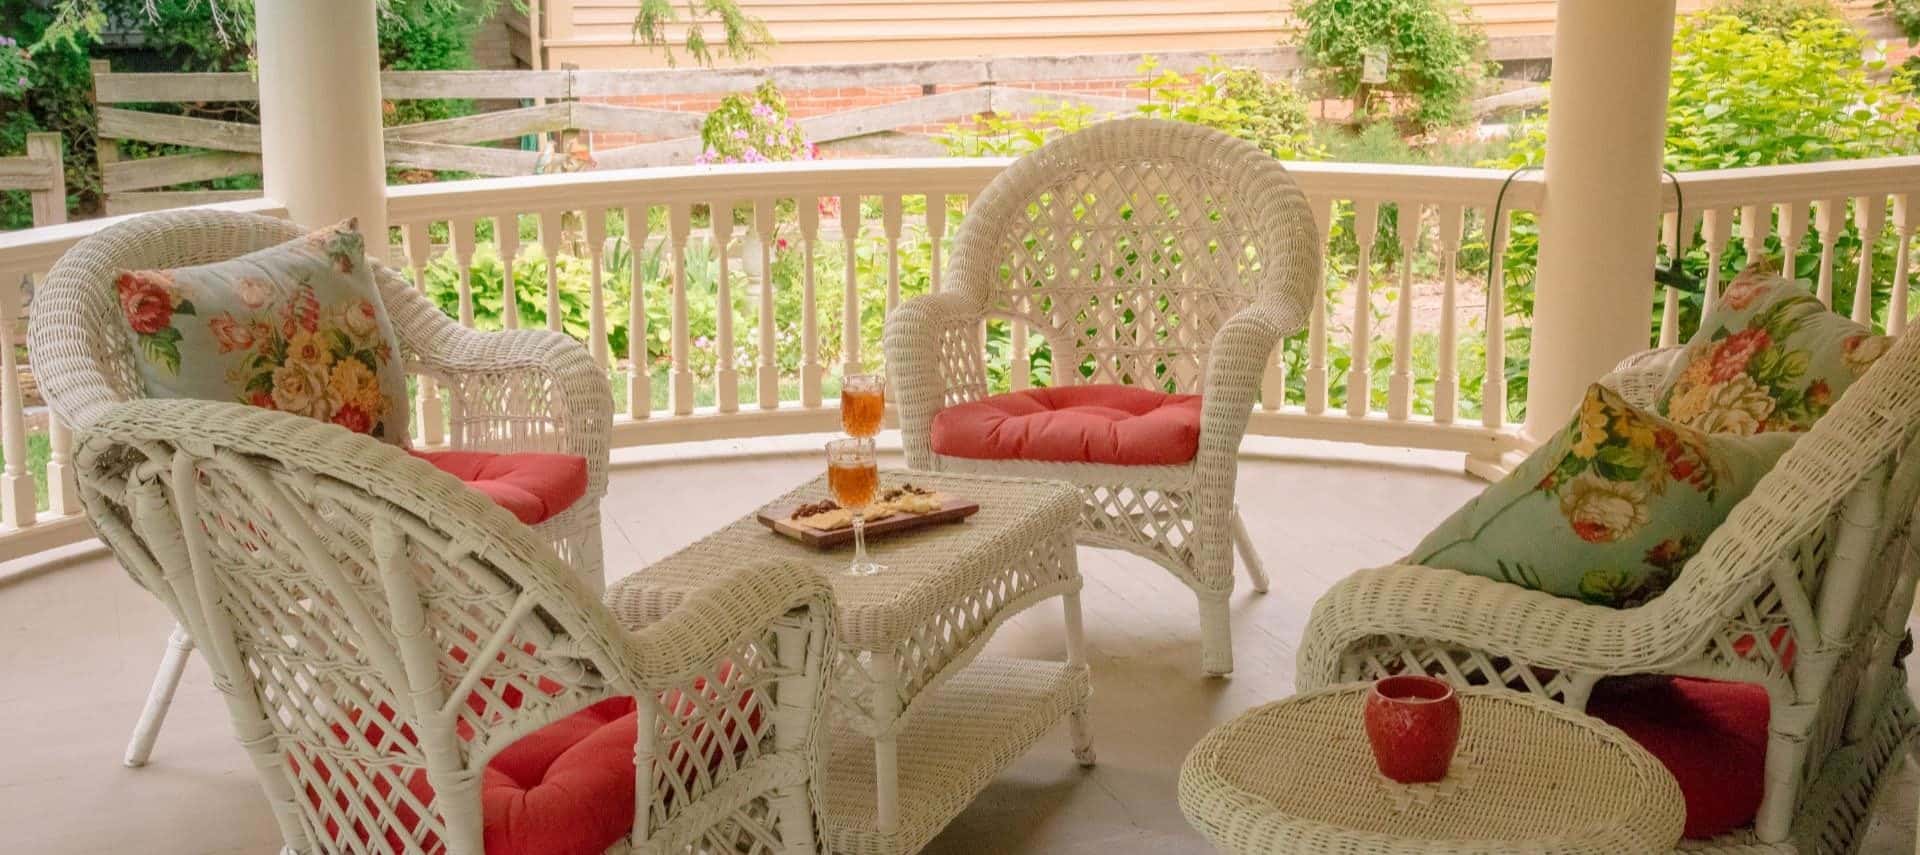 White wicker patio furniture with coral and floral cushions and pillows on front porch